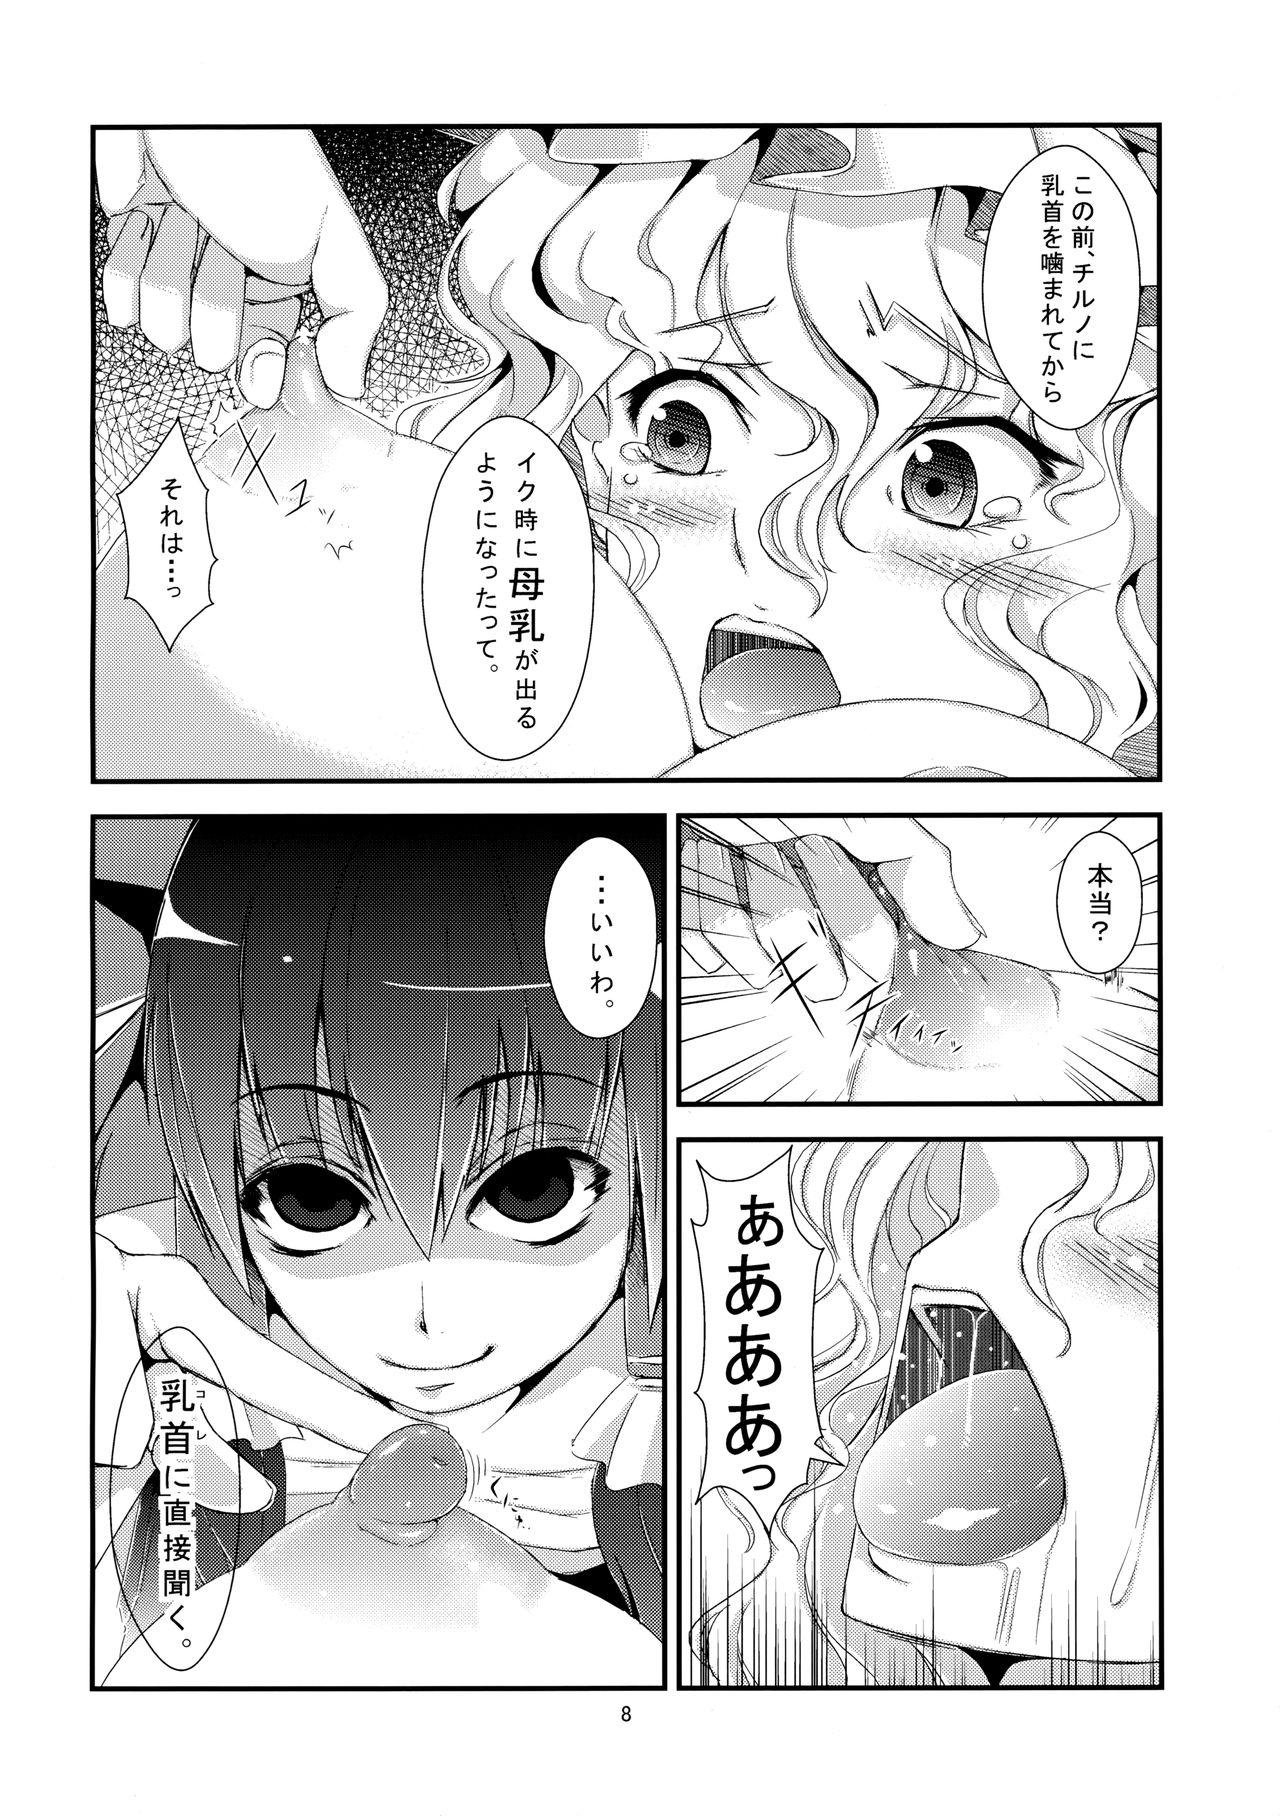 Outdoor AdultsOnly - Touhou project Negra - Page 7